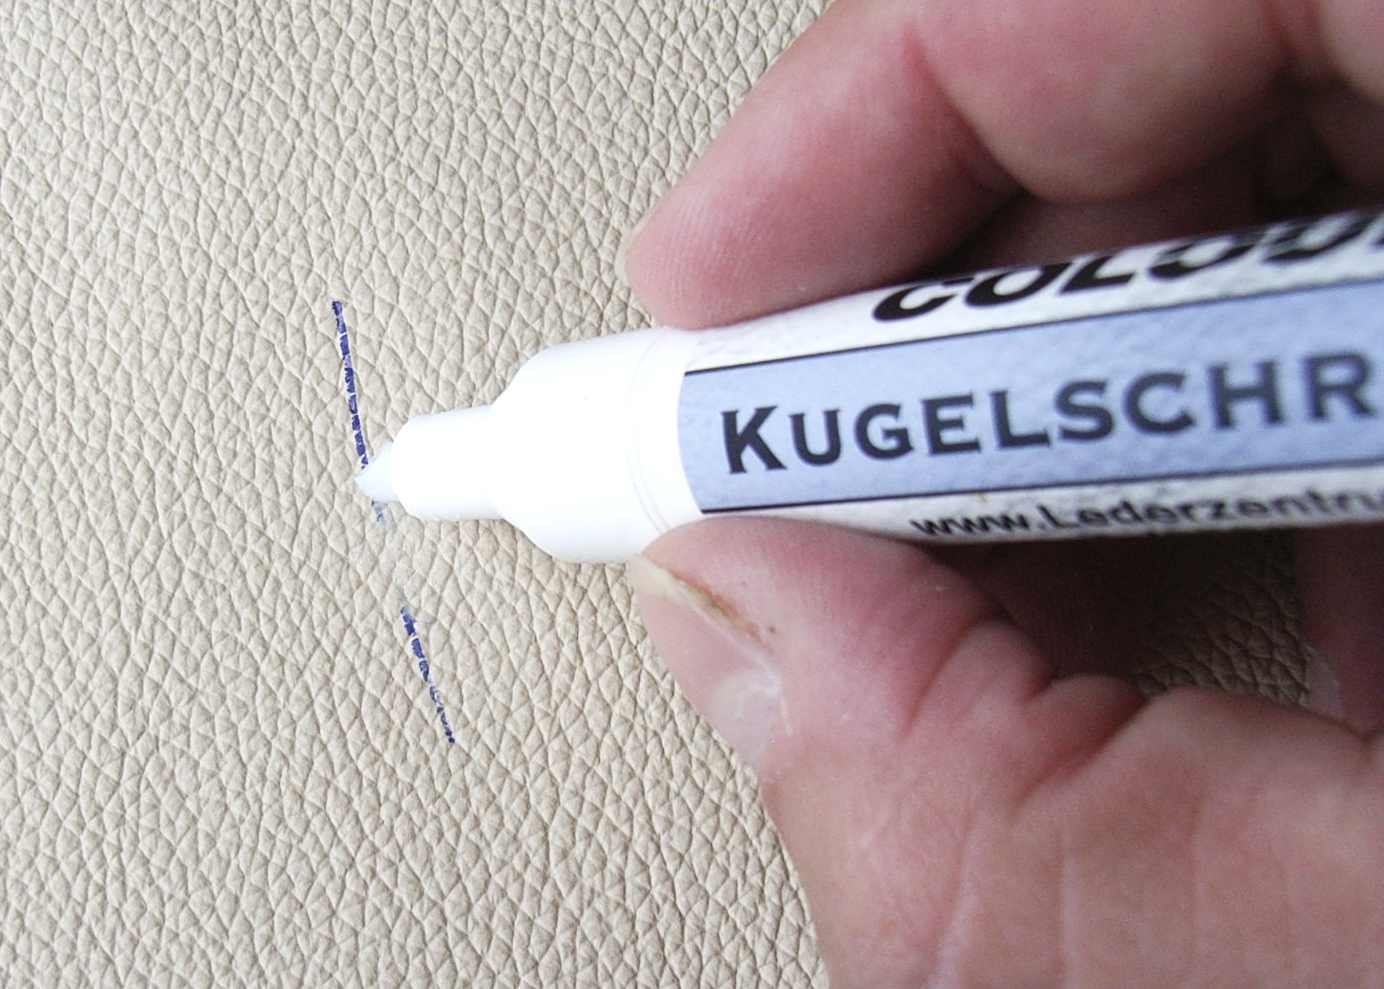 Biro Ballpoint Pen Marks From Leather, How To Get Pen Off Leather